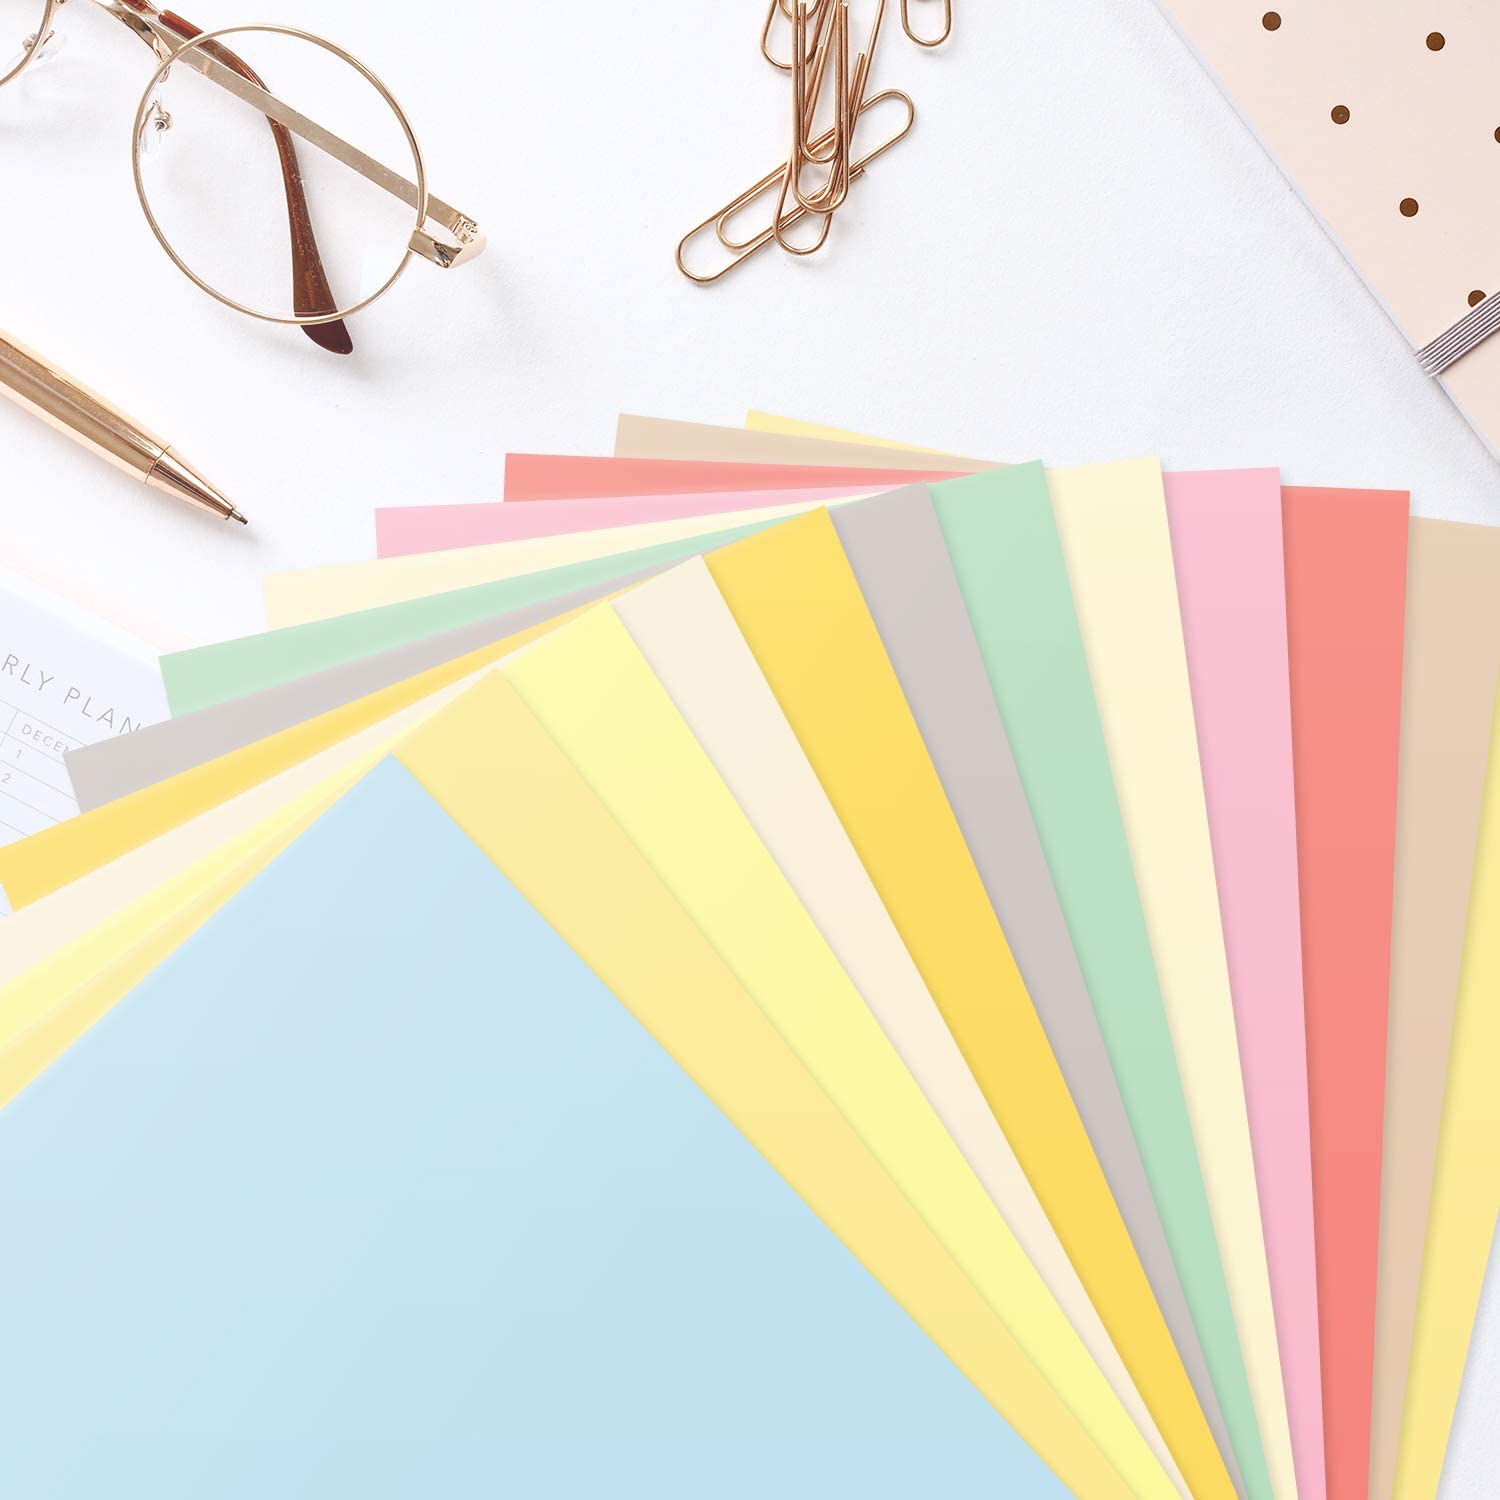 8.5 x 14” Pastel Color Paper – Great for Cards and Stationery Printing | Legal, Menu Size | Lightweight 20lb Paper | 100 Sheets | Ivory - image 2 of 6